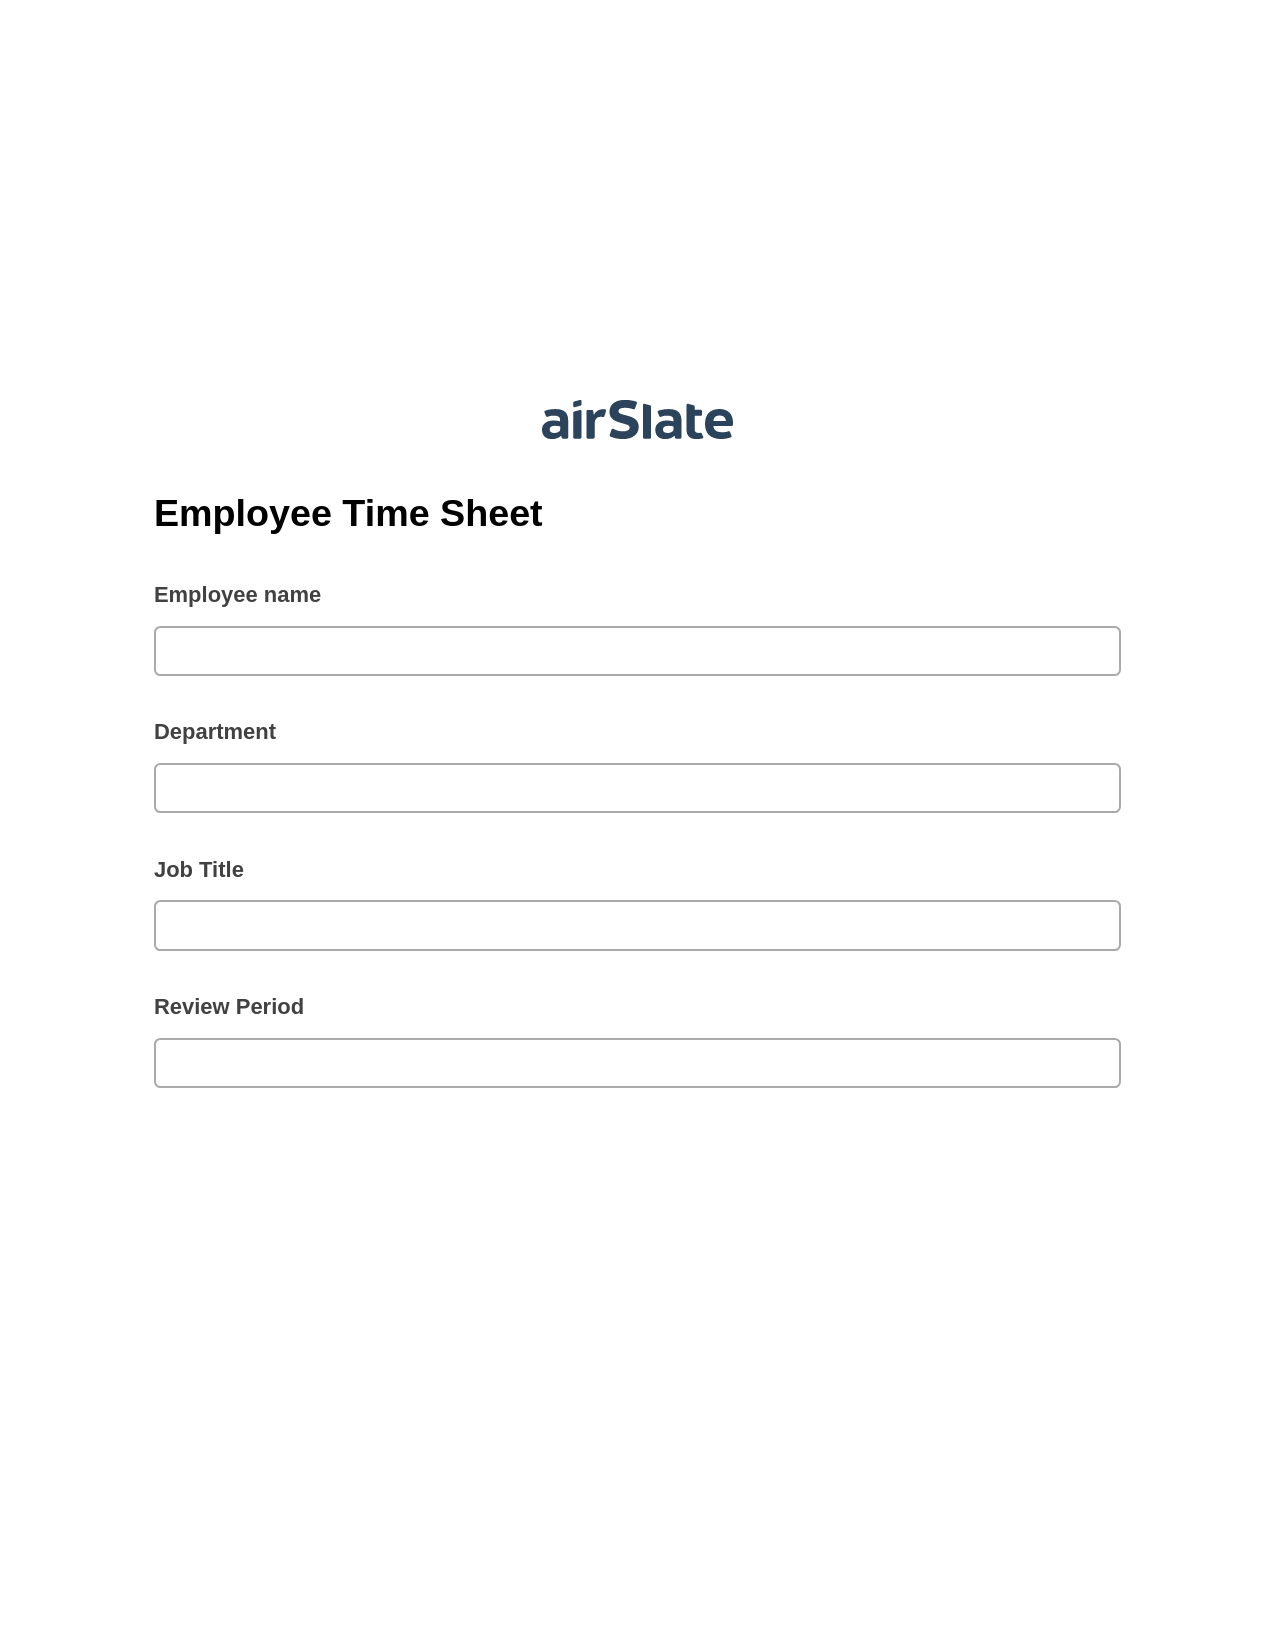 Employee Time Sheet Pre-fill Dropdowns from CSV file Bot, Create slate addon, Archive to OneDrive Bot